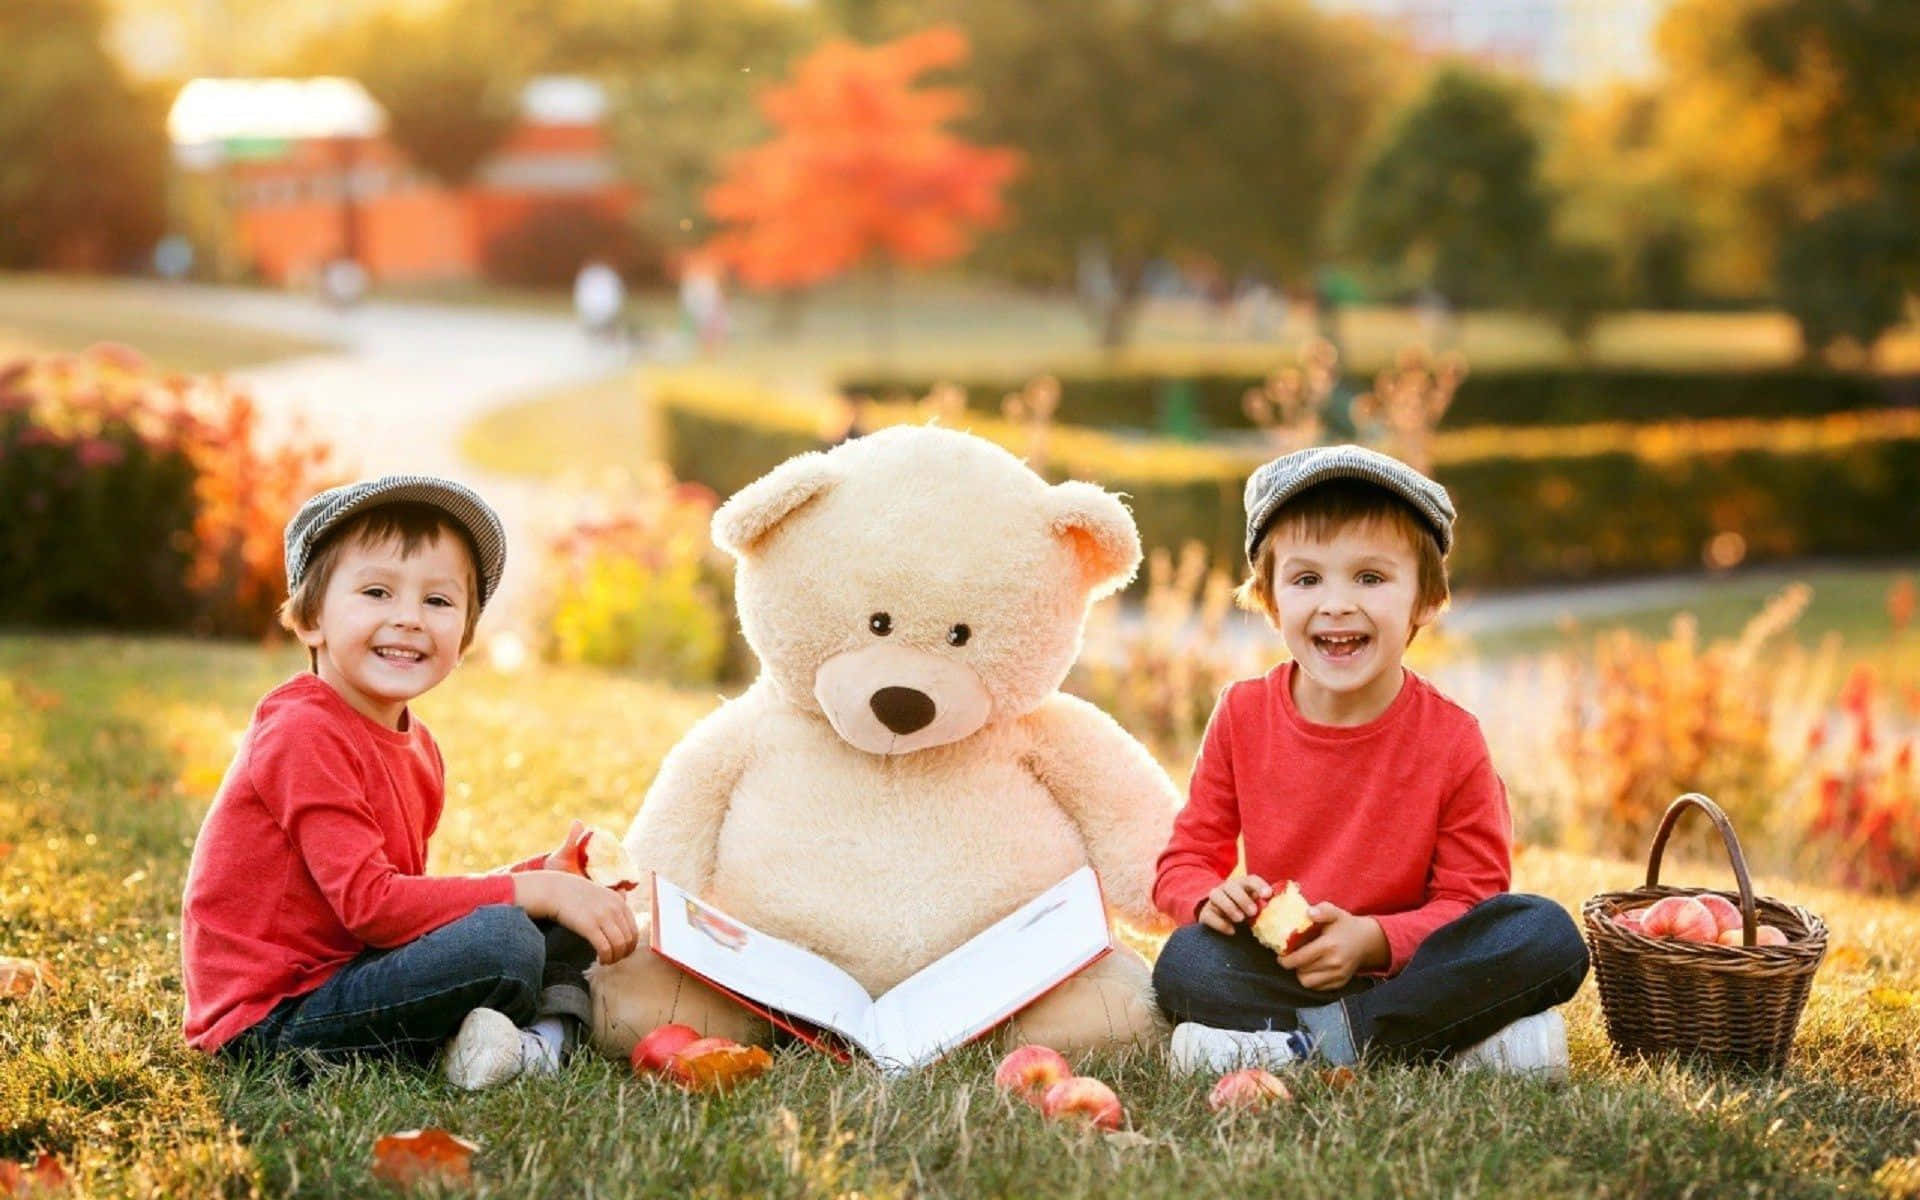 Adorable toddlers playing together outdoors Wallpaper